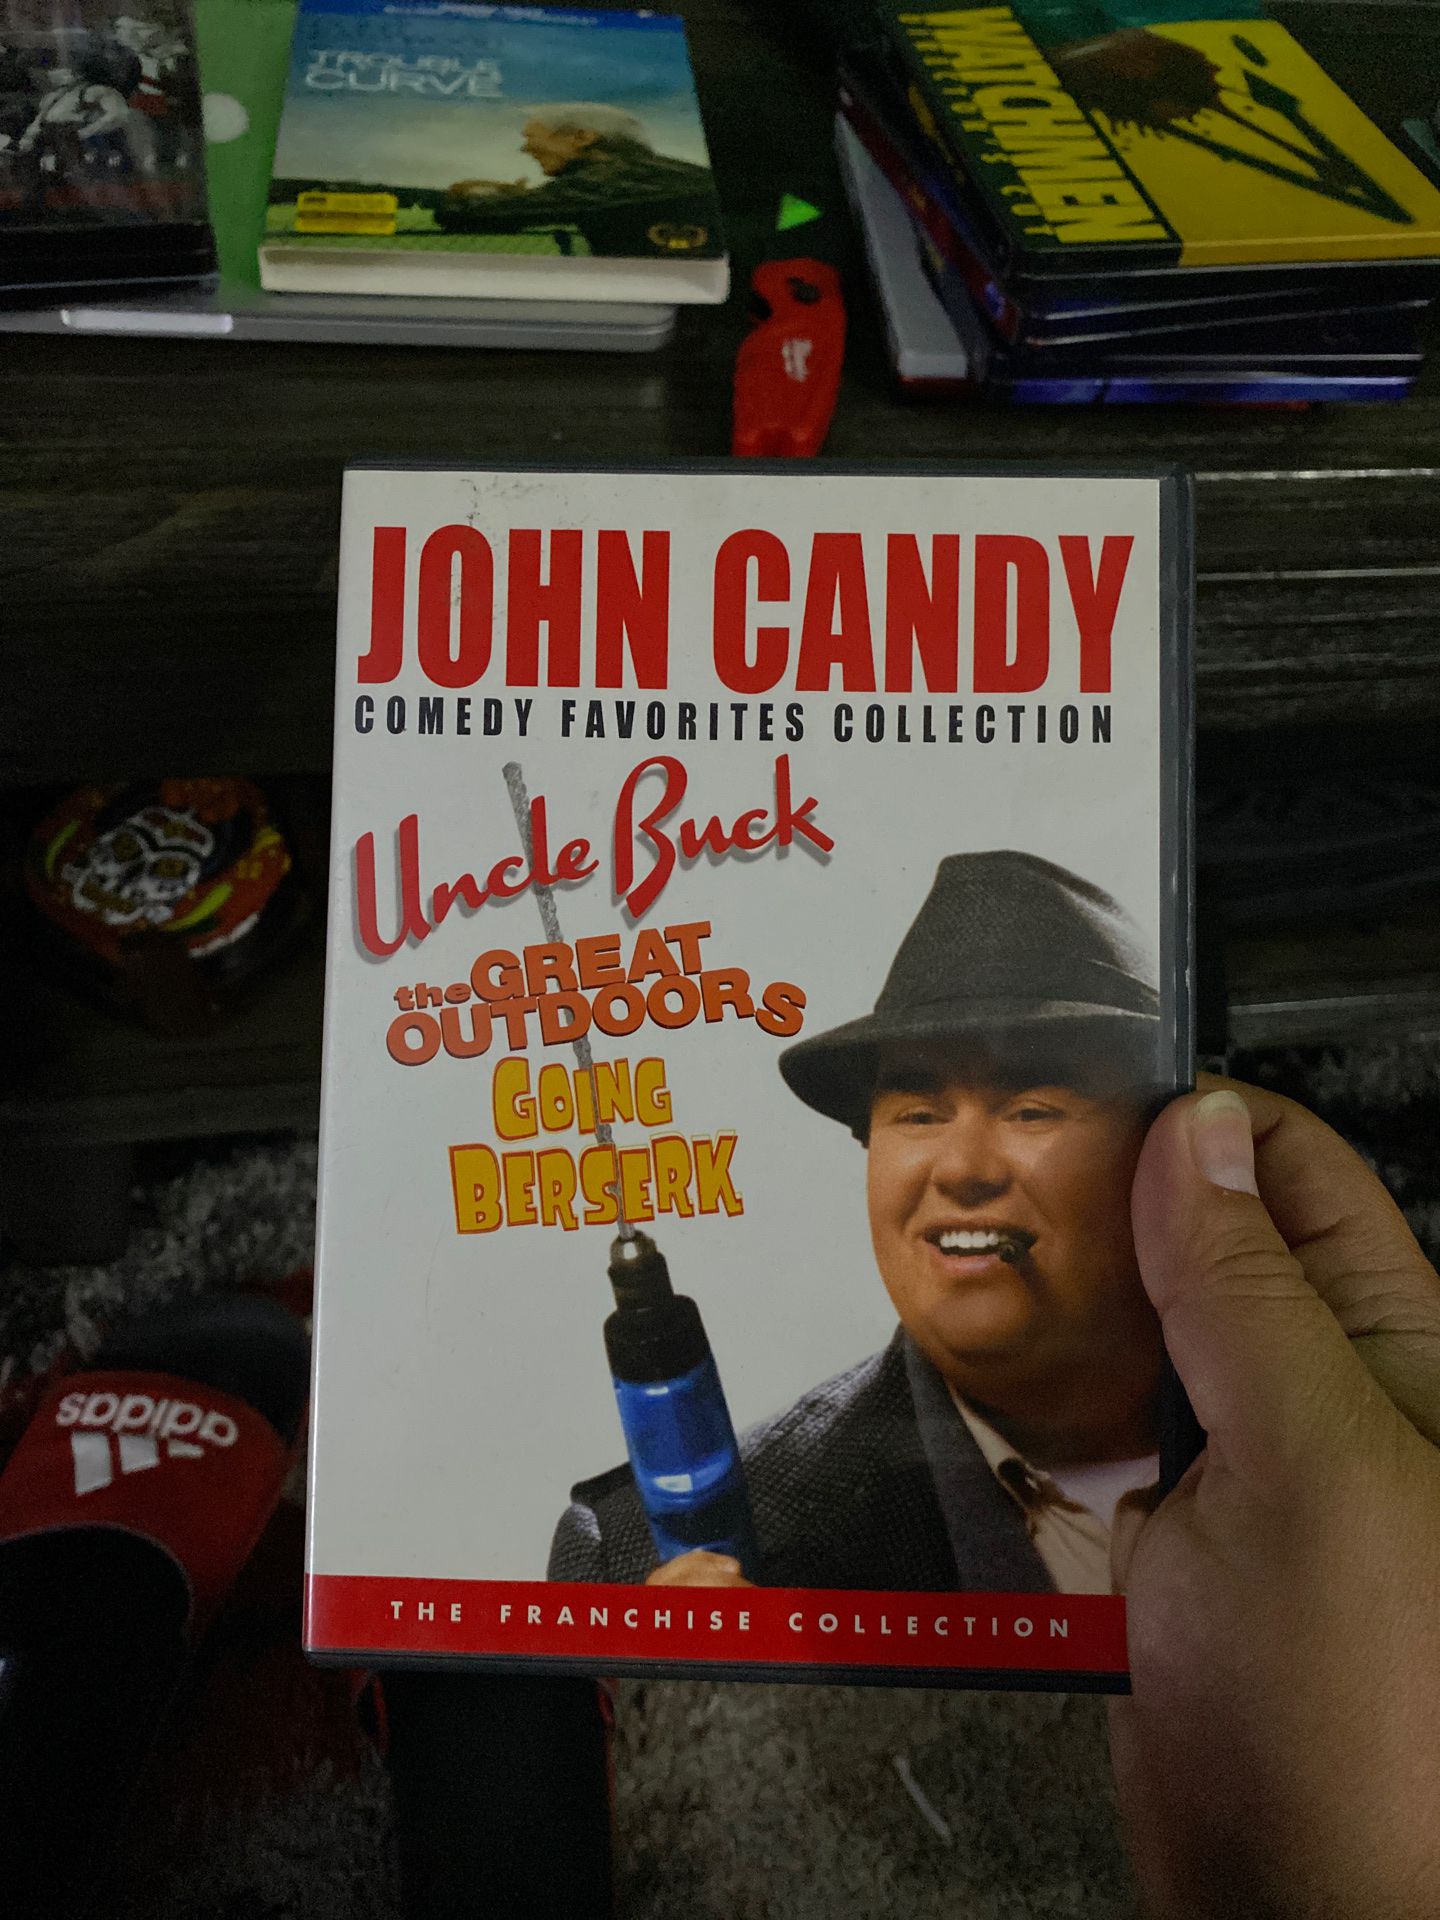 John candy 3 movie collection dvd